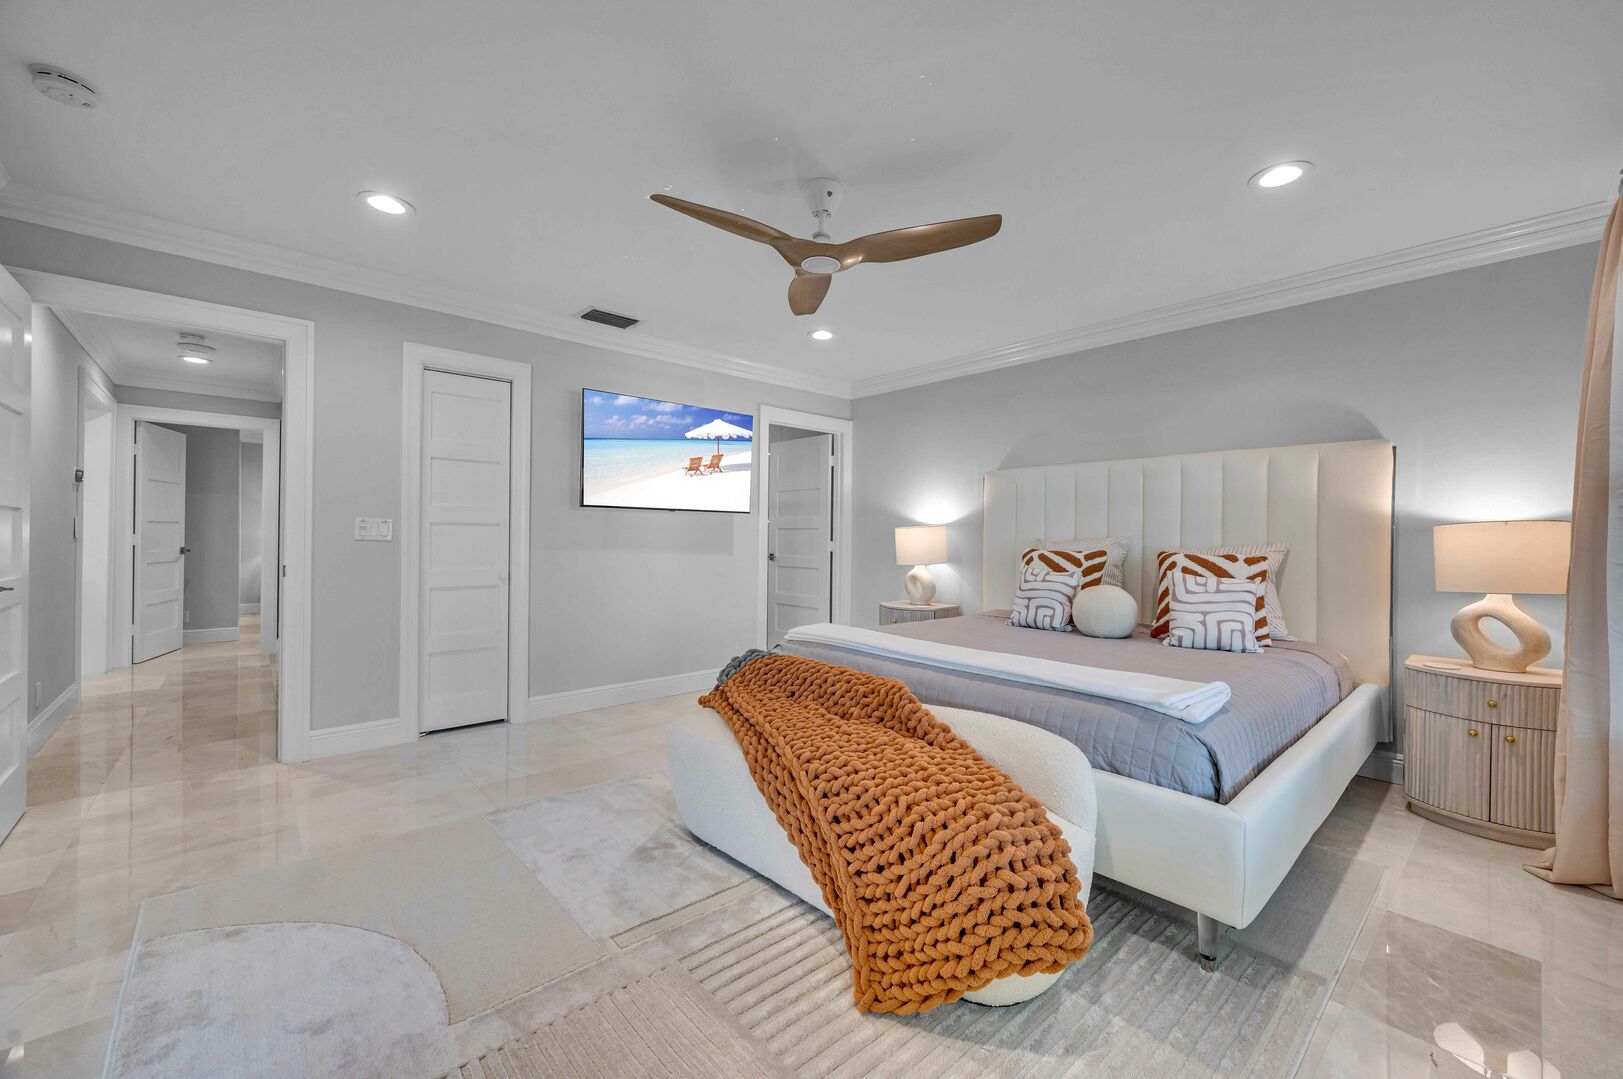 Bedroom six boasts a king bed, ensuite bathroom and smart TV.